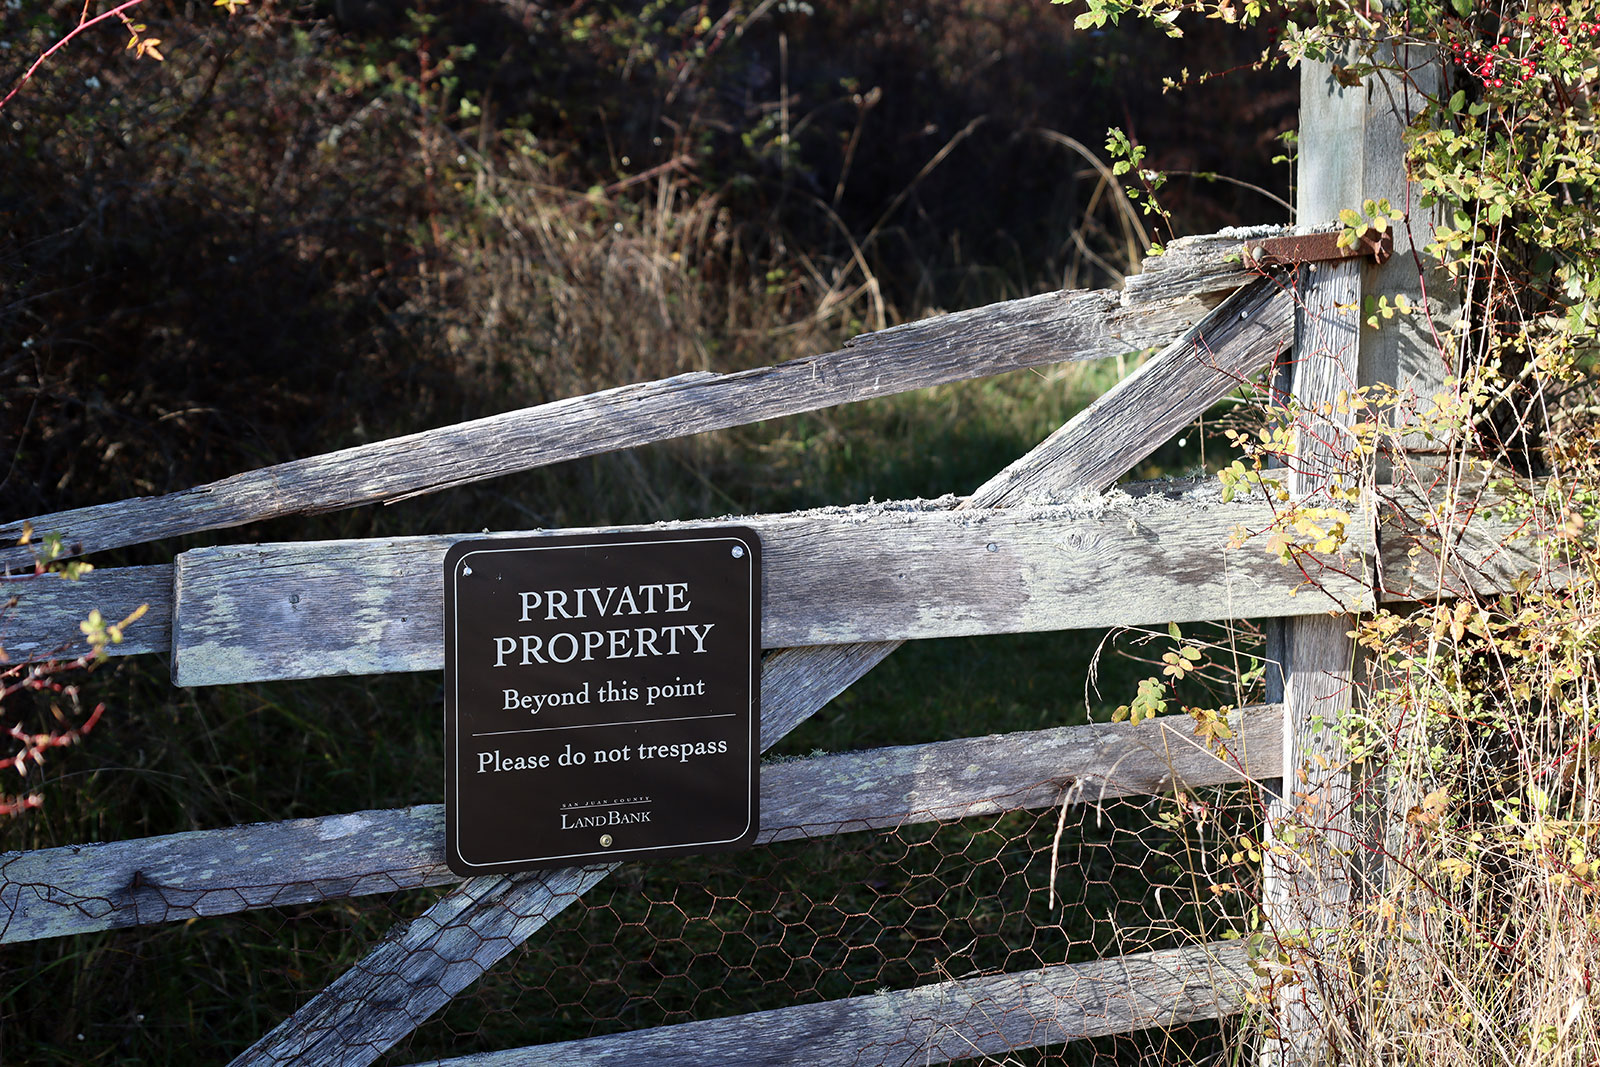 Private property sign on a wooden fence gate